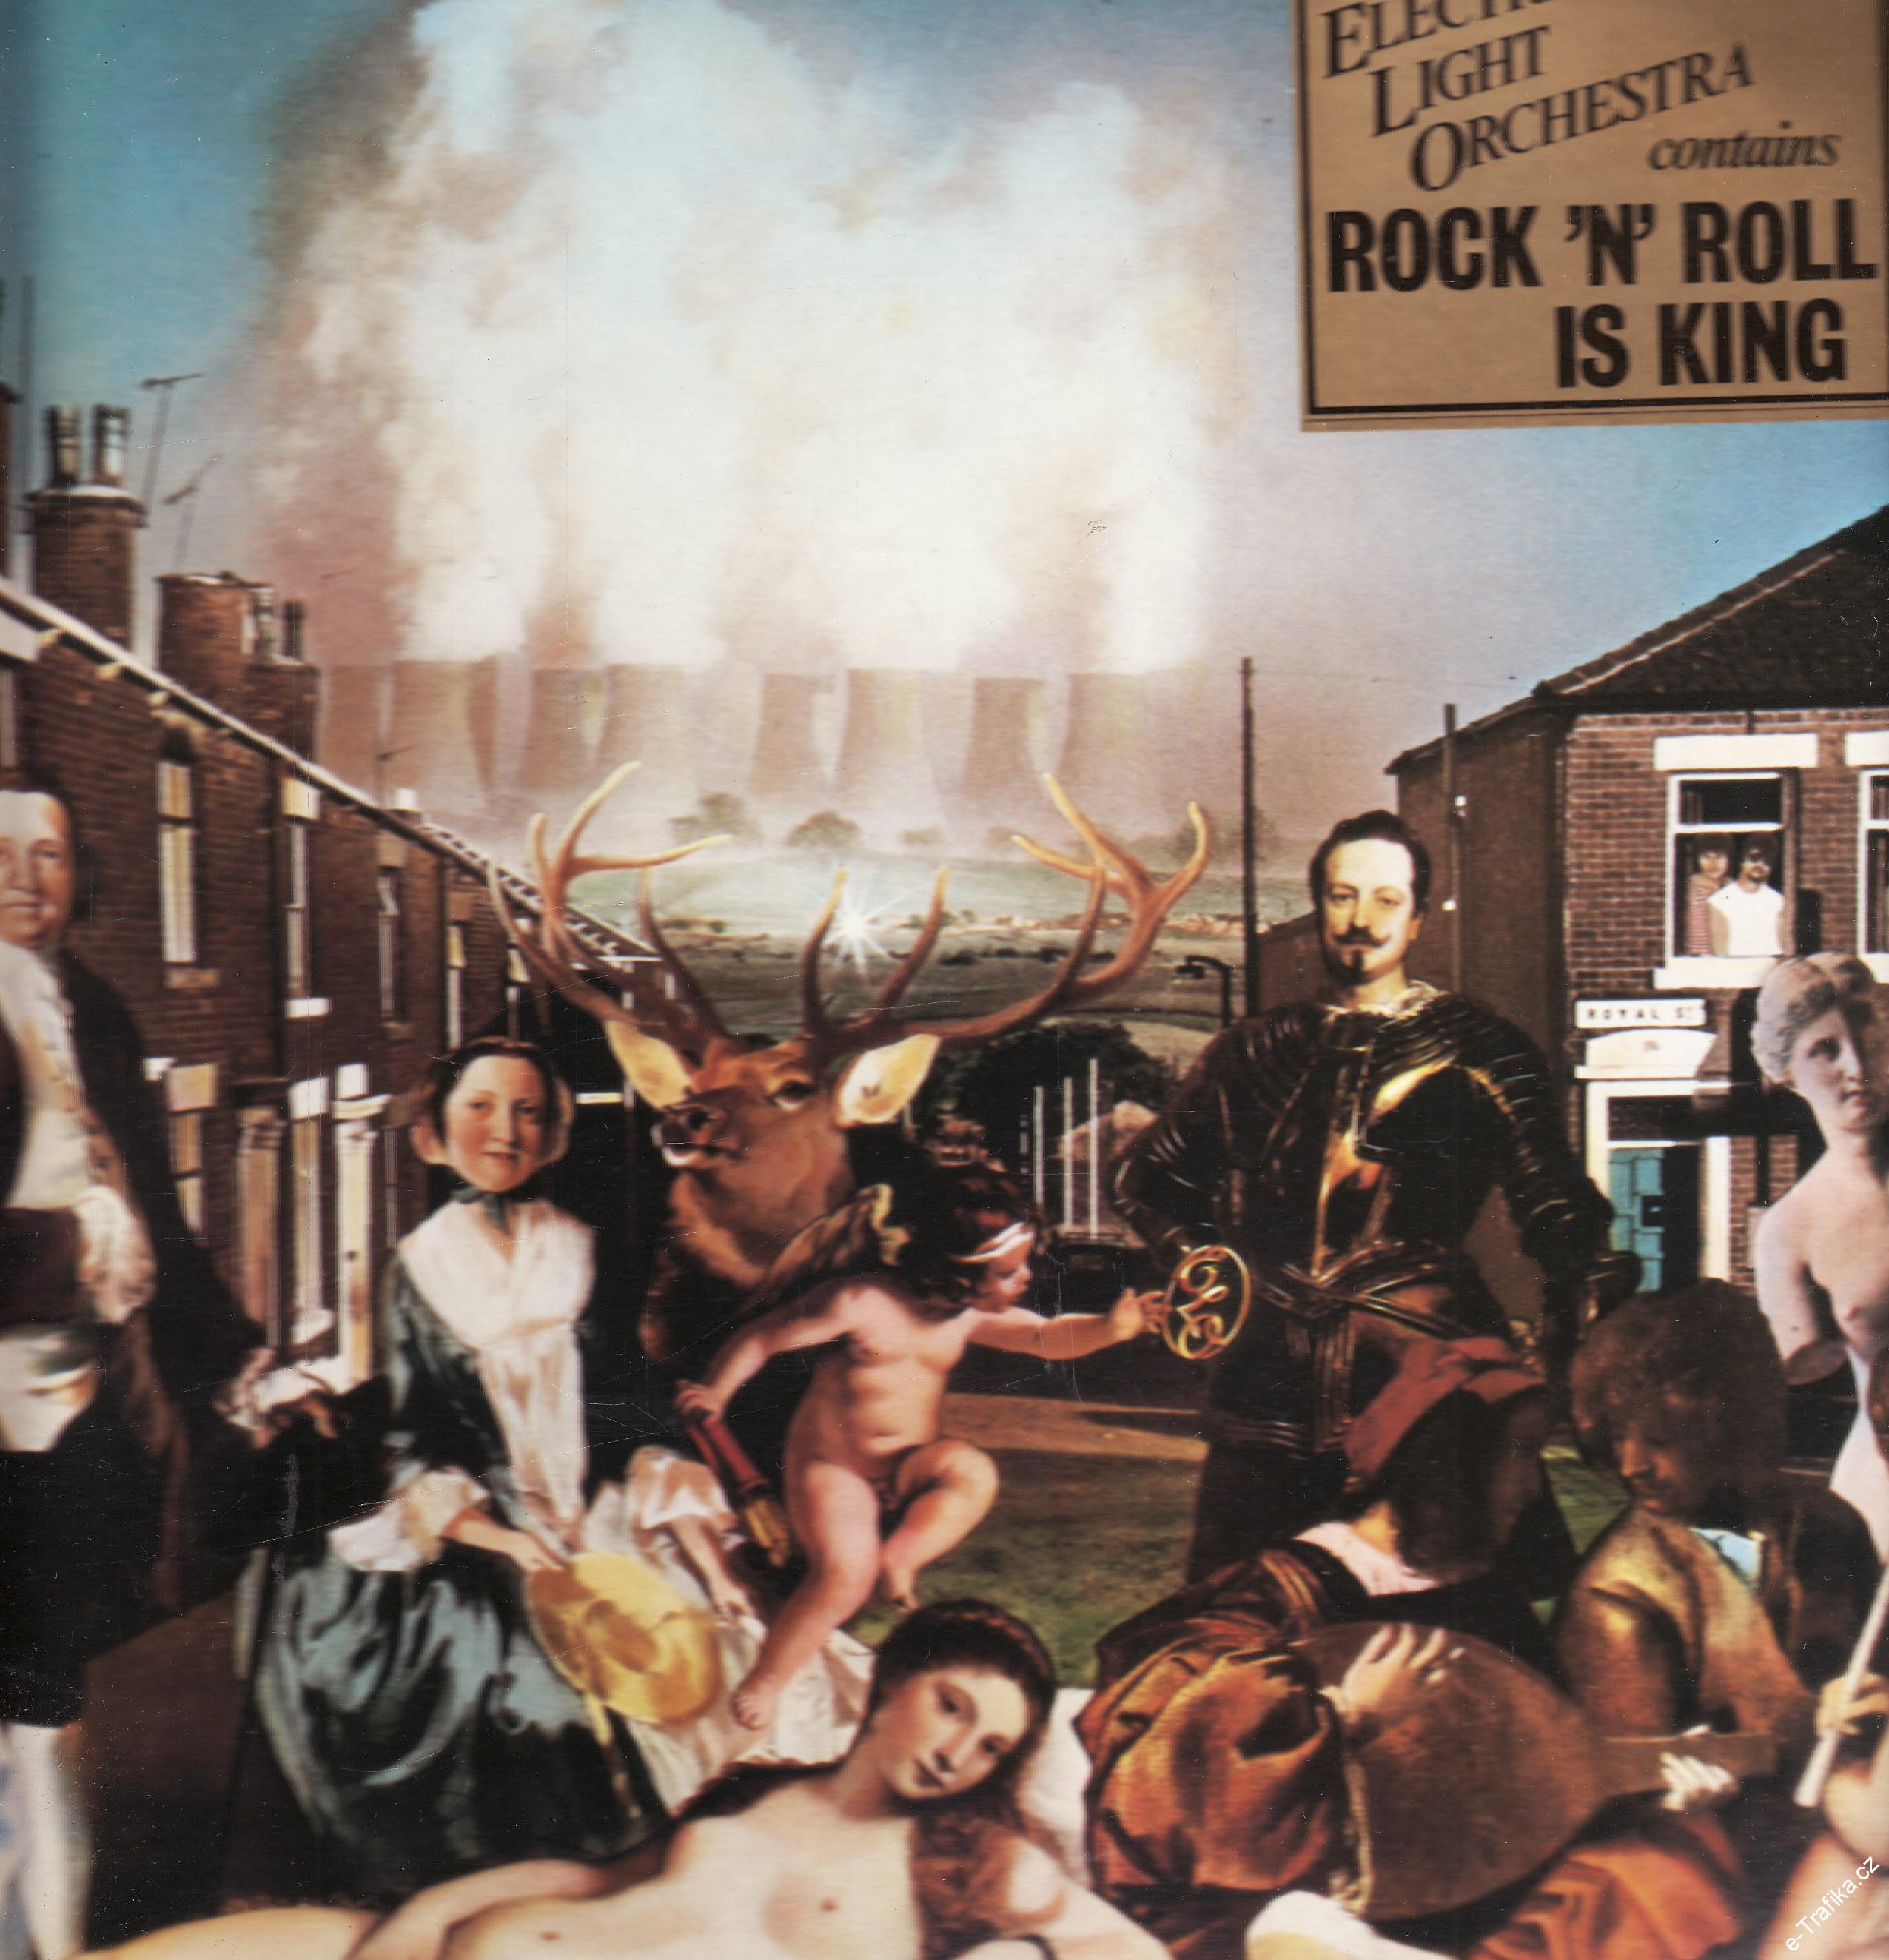 LP ELO Electric Light Orchestra contains, Rock ´N´ Roll is King, 1983